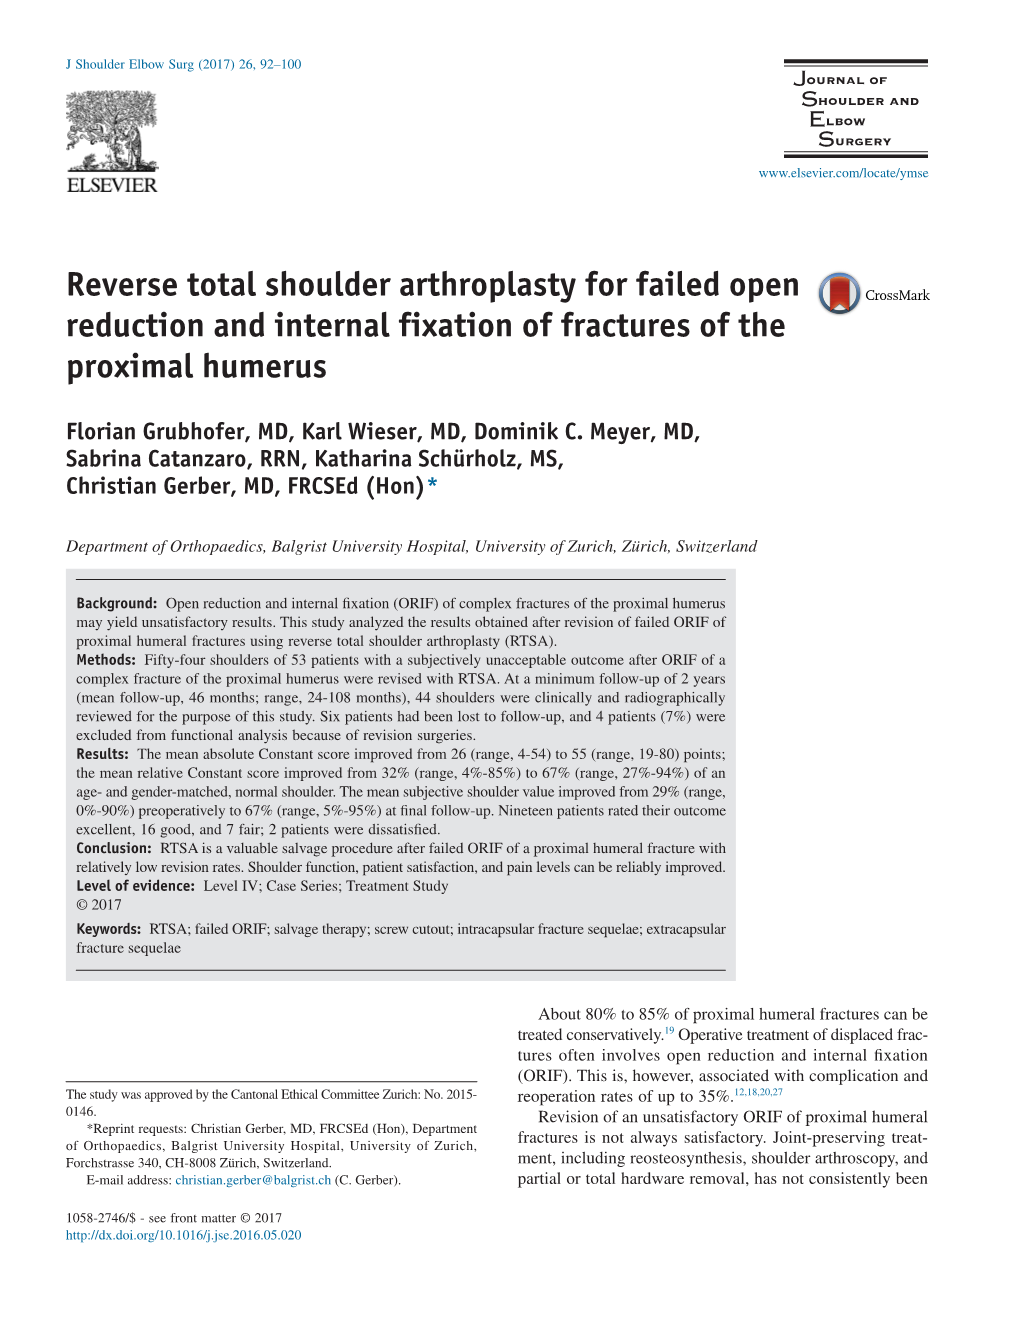 Reverse Total Shoulder Arthroplasty for Failed Open Reduction and Internal Fixation of Fractures of the Proximal Humerus